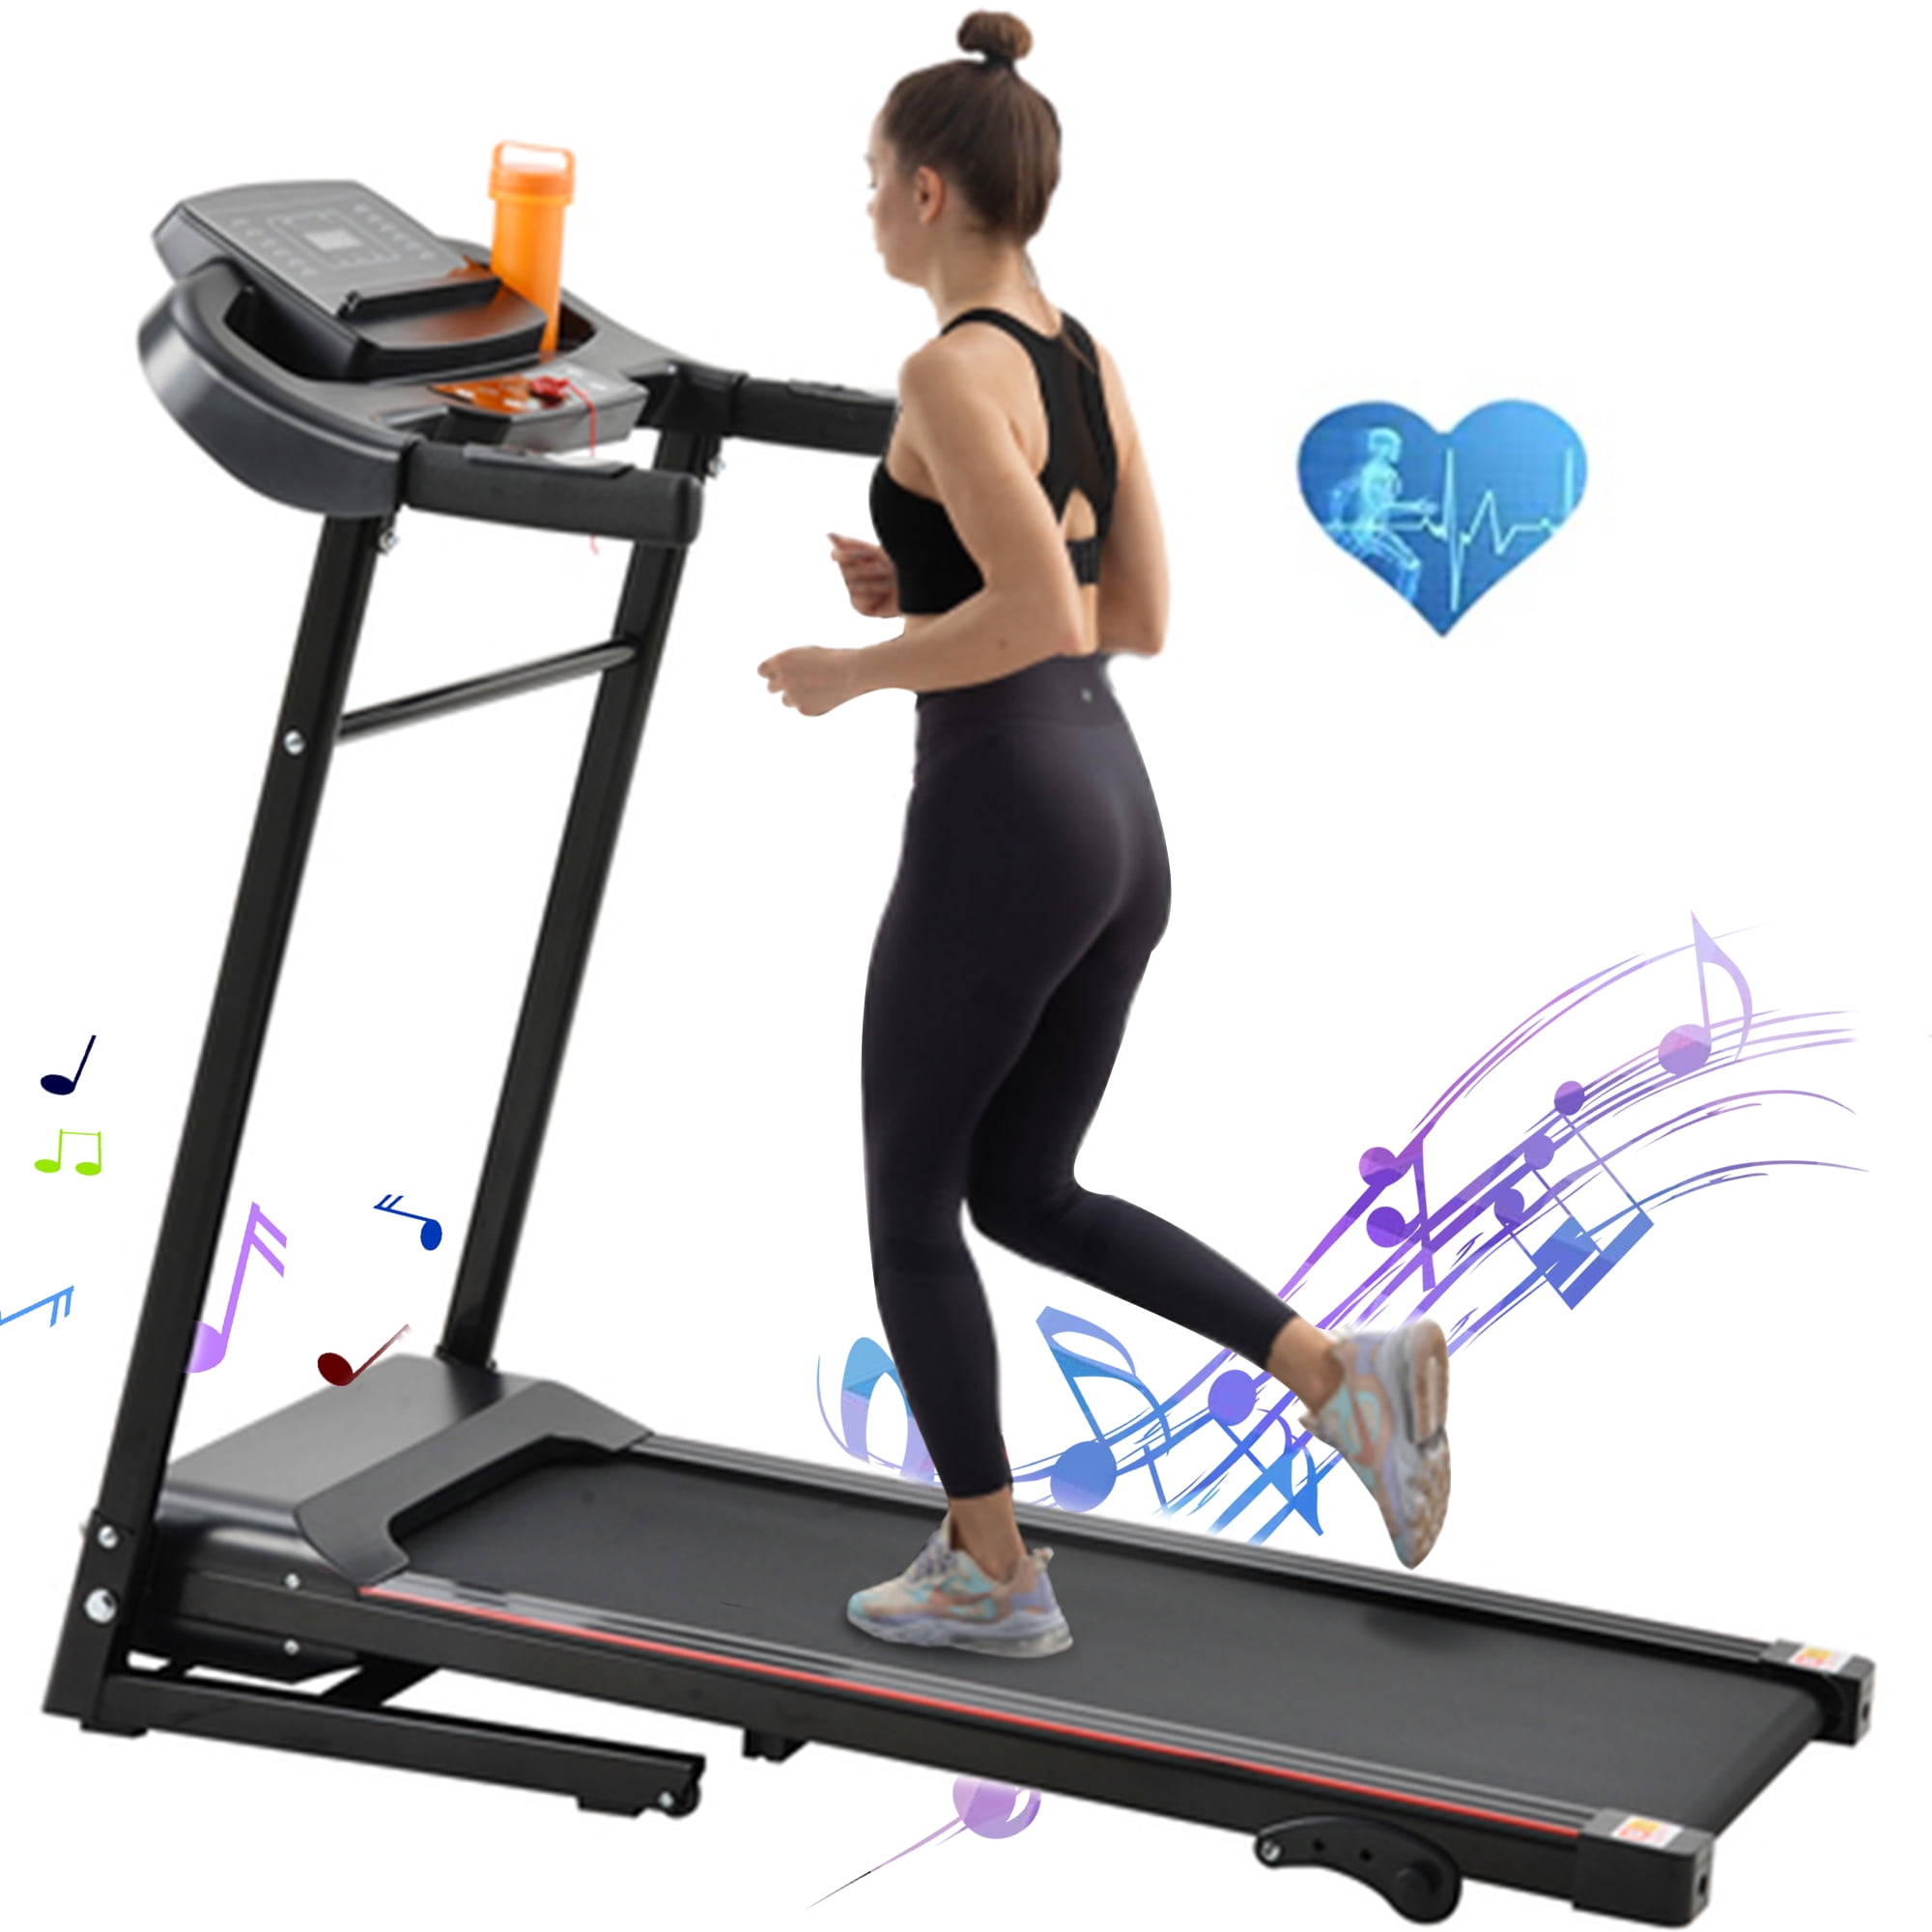 ❤Folding Manual Treadmill Working Machine Fitness Exercise Incline Home 